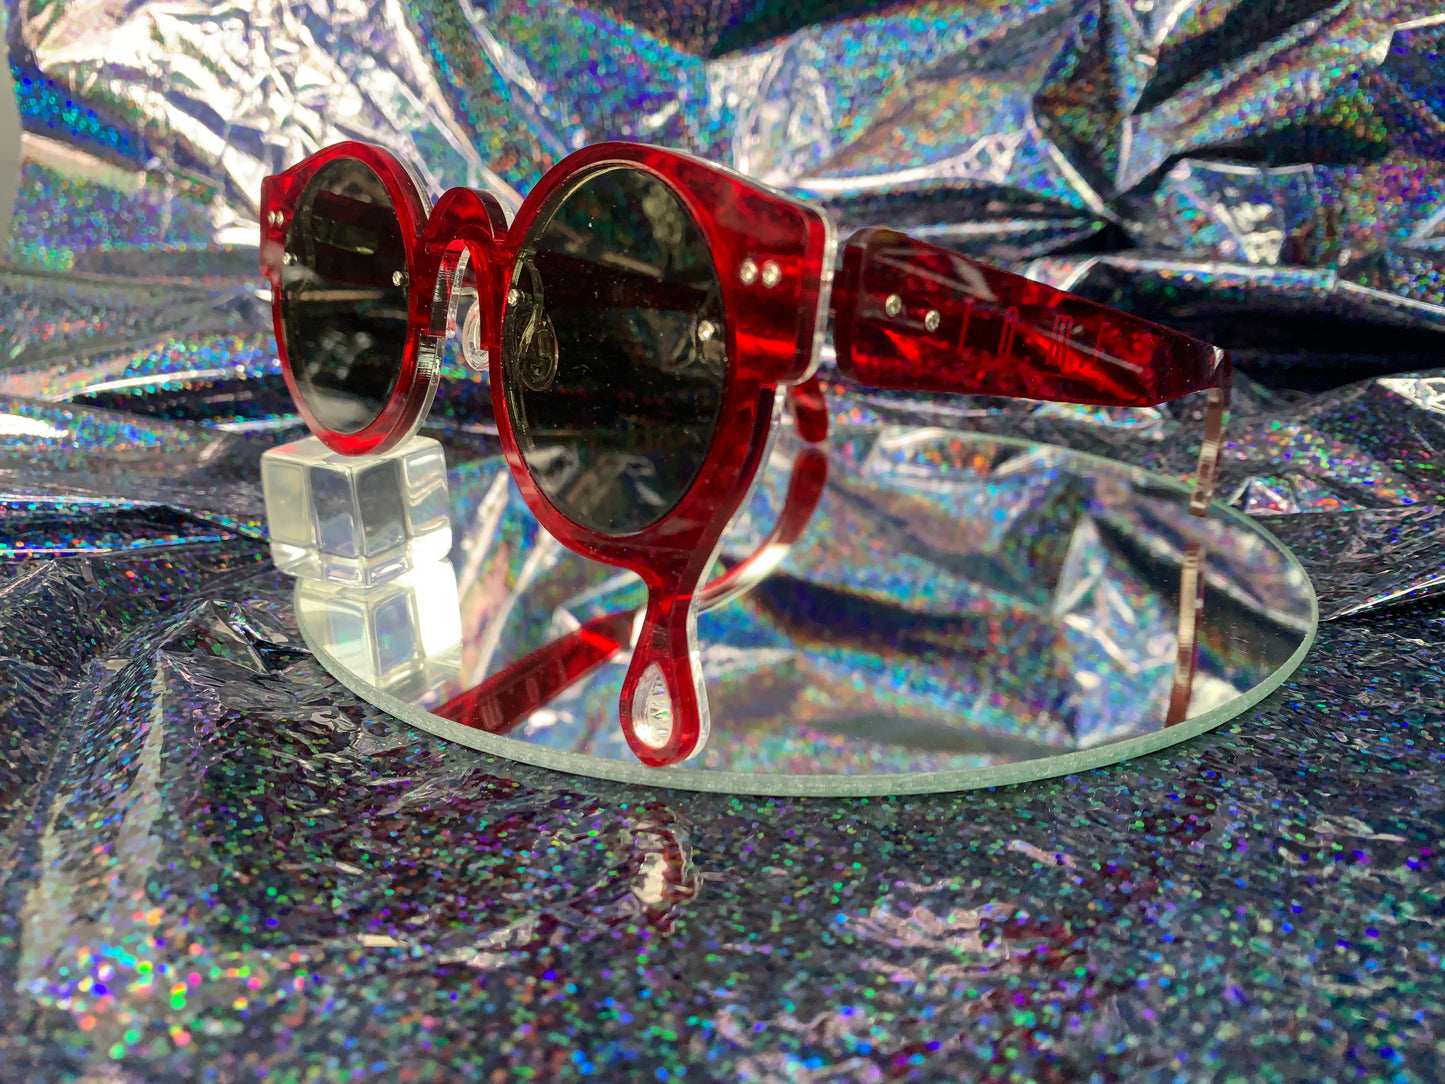 A side view of acrylic laser cut sunglasses with a teardrop accent dripping down the right side of the glasses with the brand logo T.O.M.E. etched on the temple. The color of the sunglasses shown are transparent red.